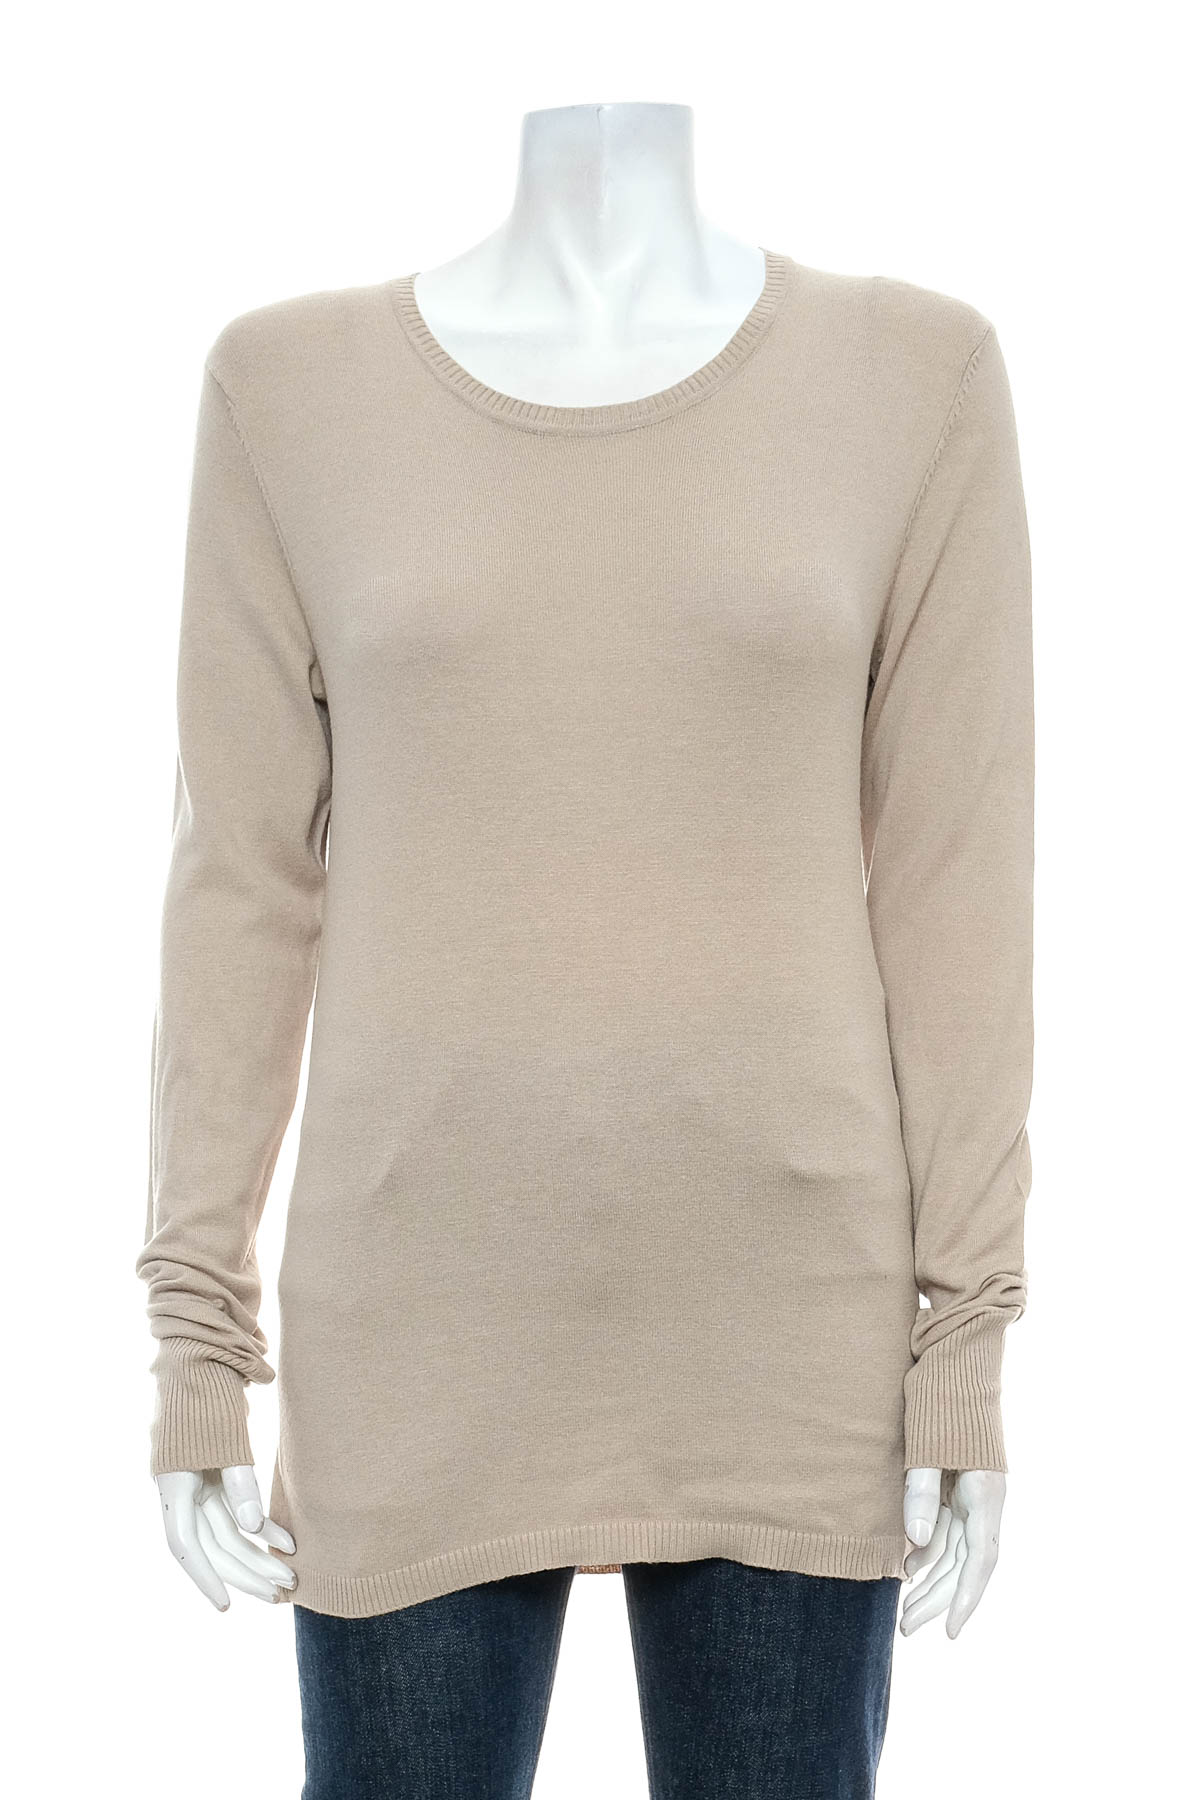 Women's sweater - United Colors of Benetton - 0